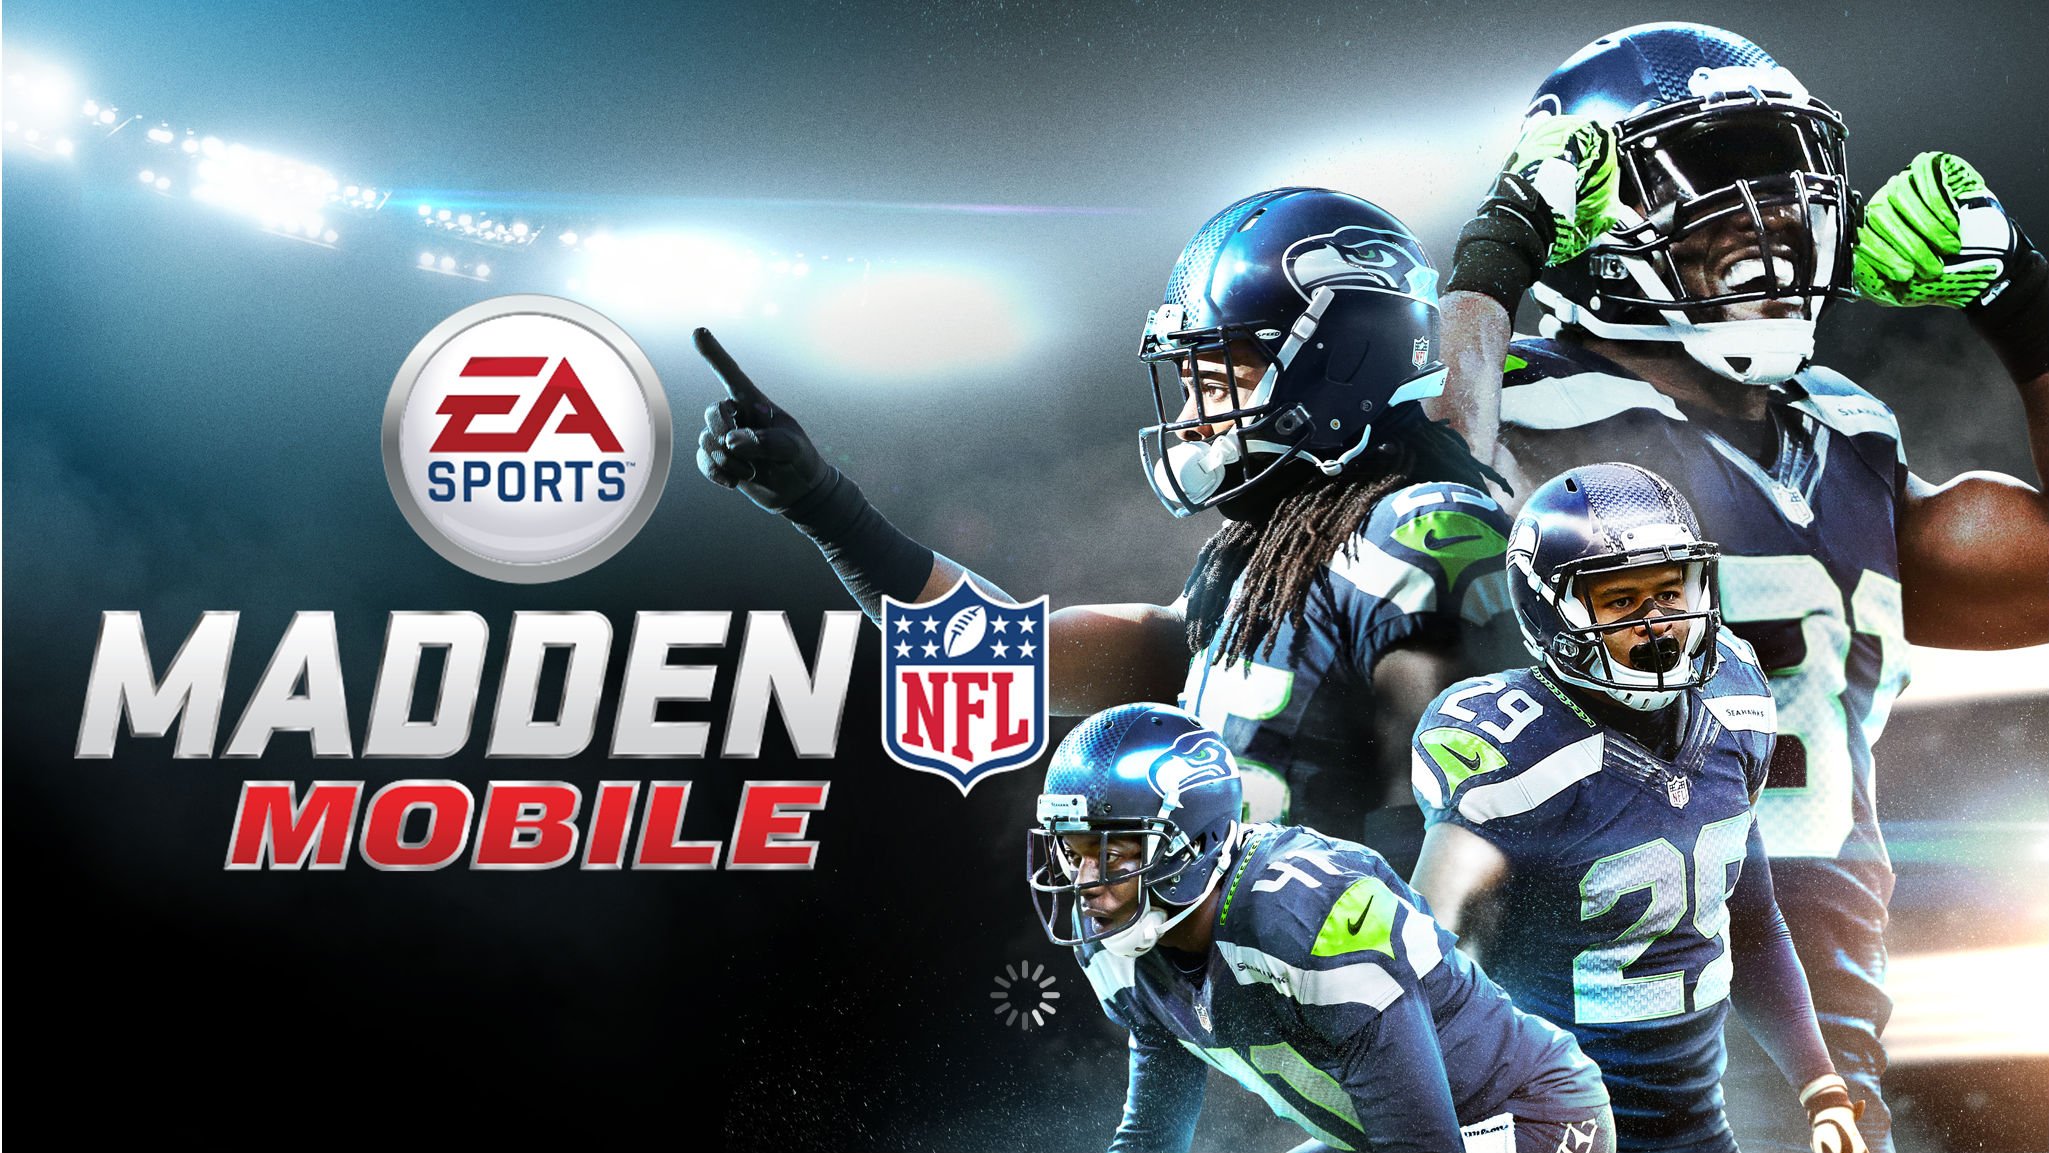 We Played Madden Mobile so You Don’t Have to